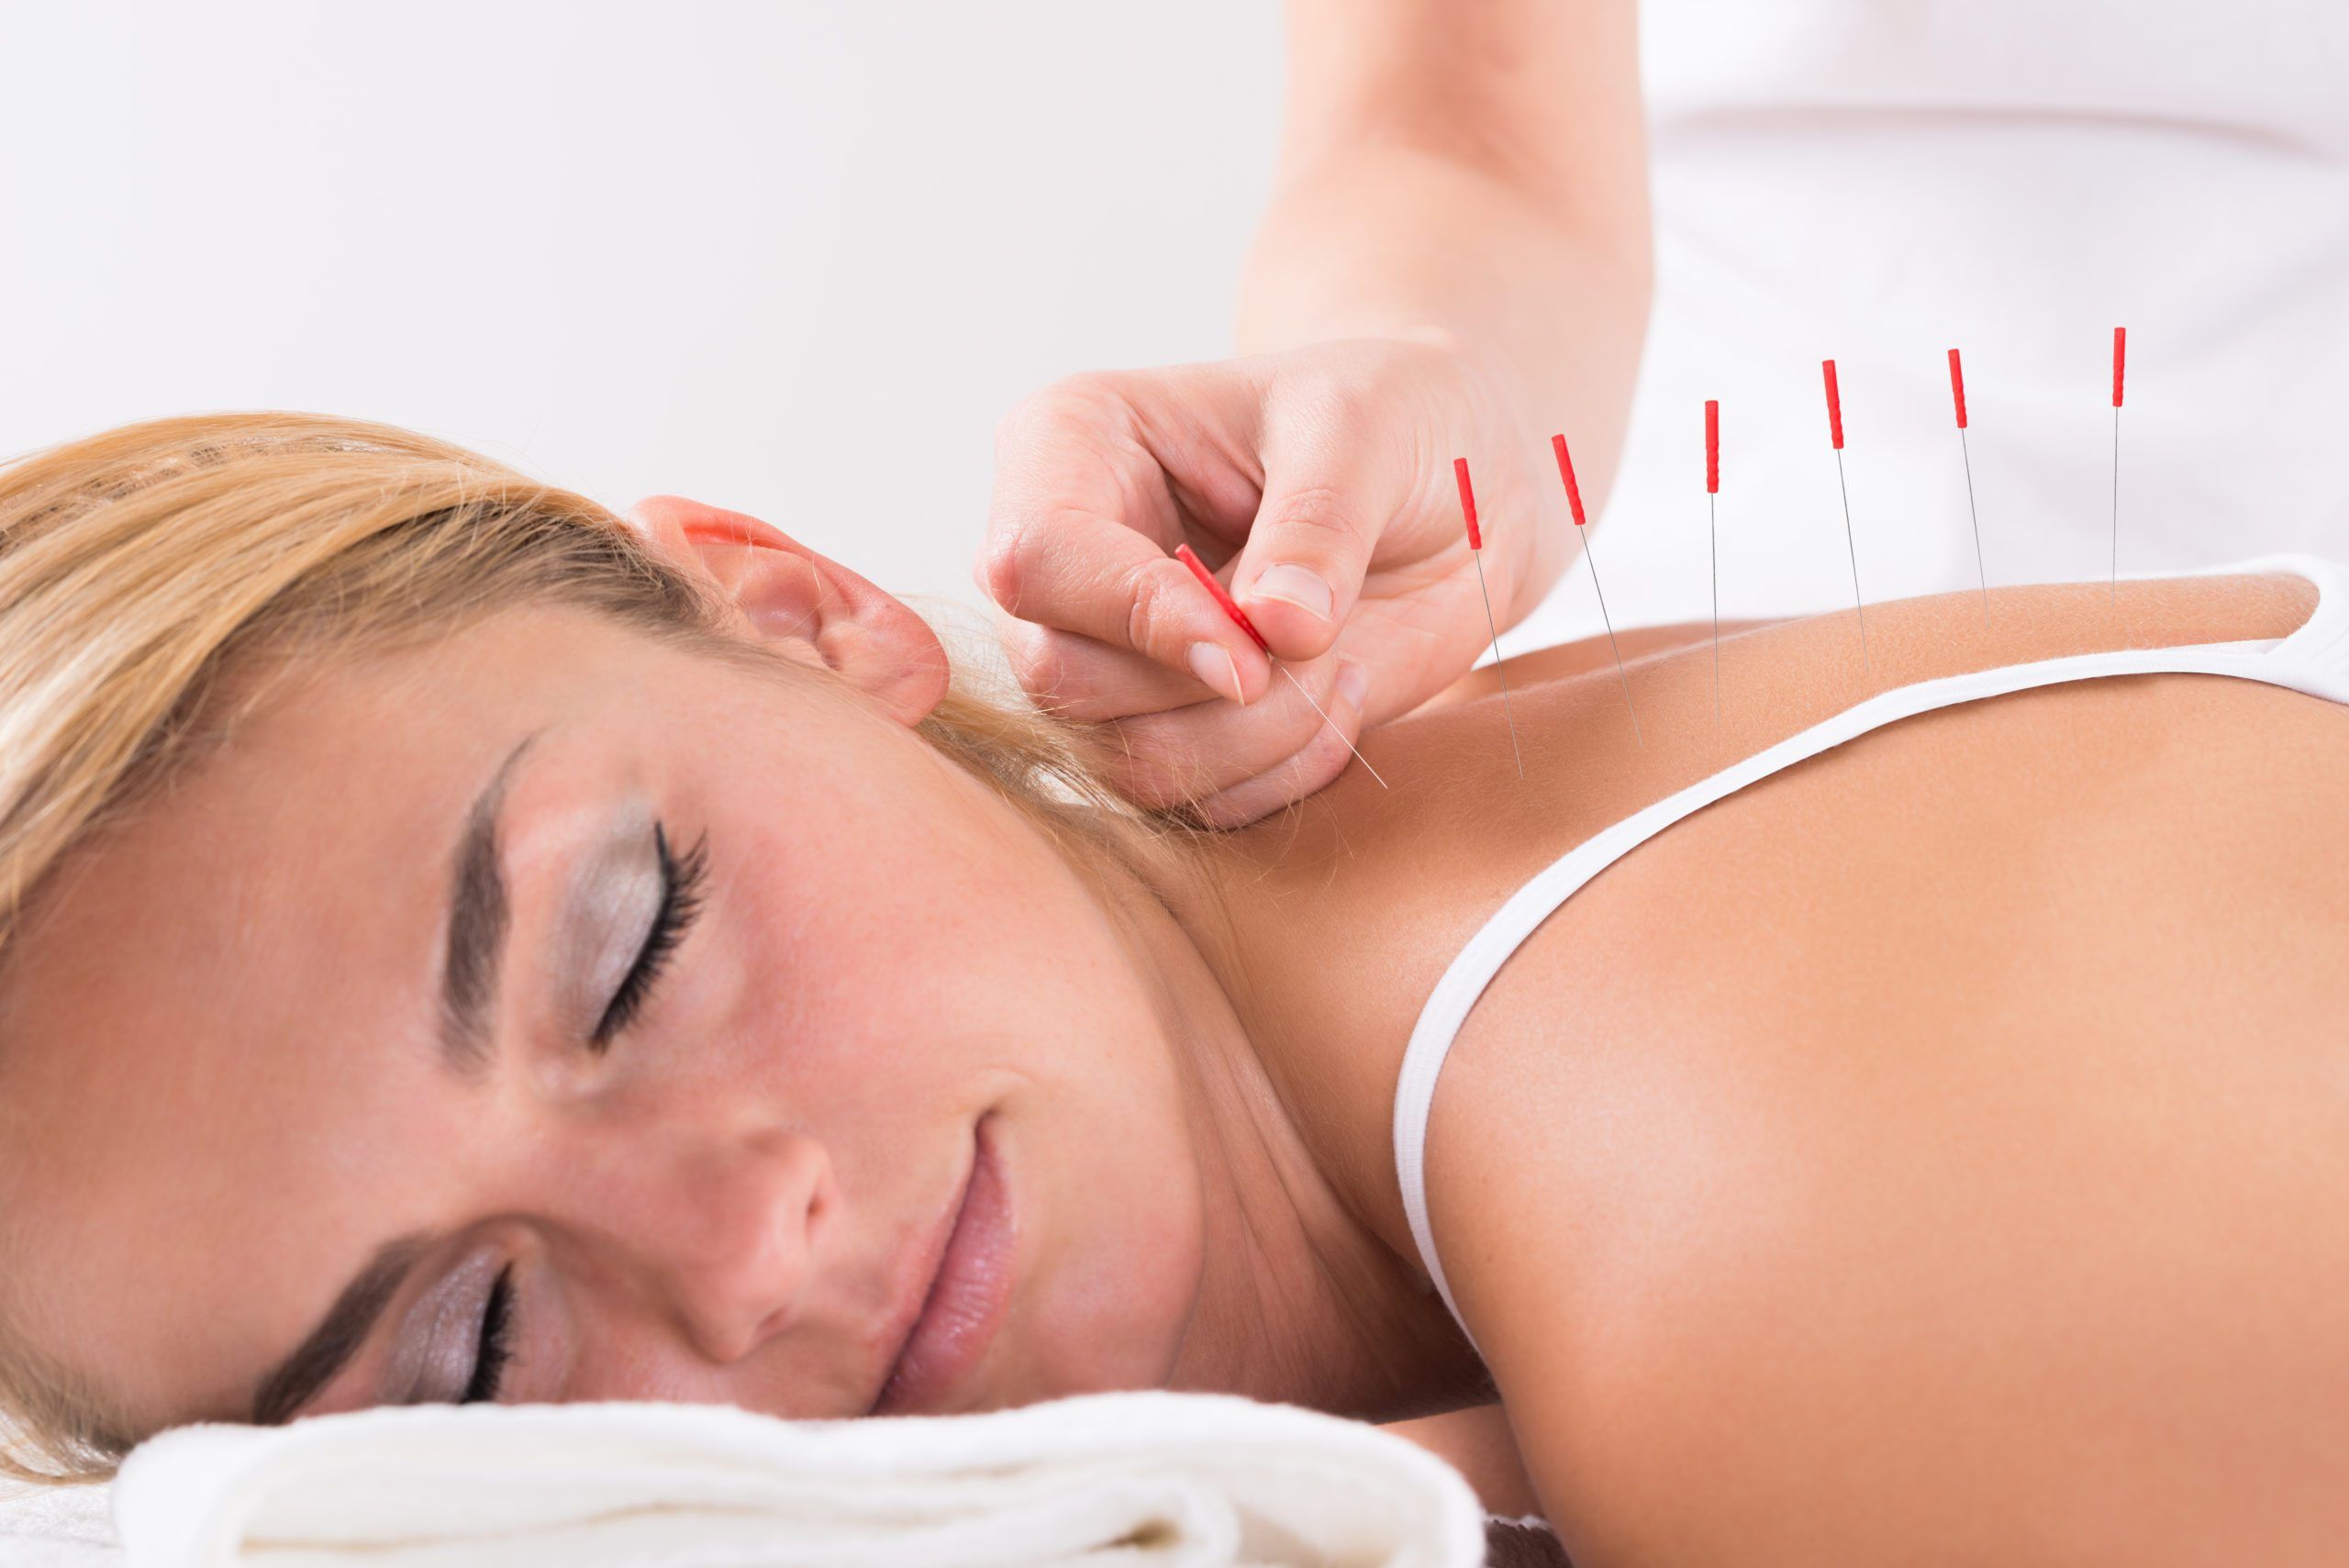 Everything You Need To Know About Acupuncture And What To Expect During An Acupuncture Treatment